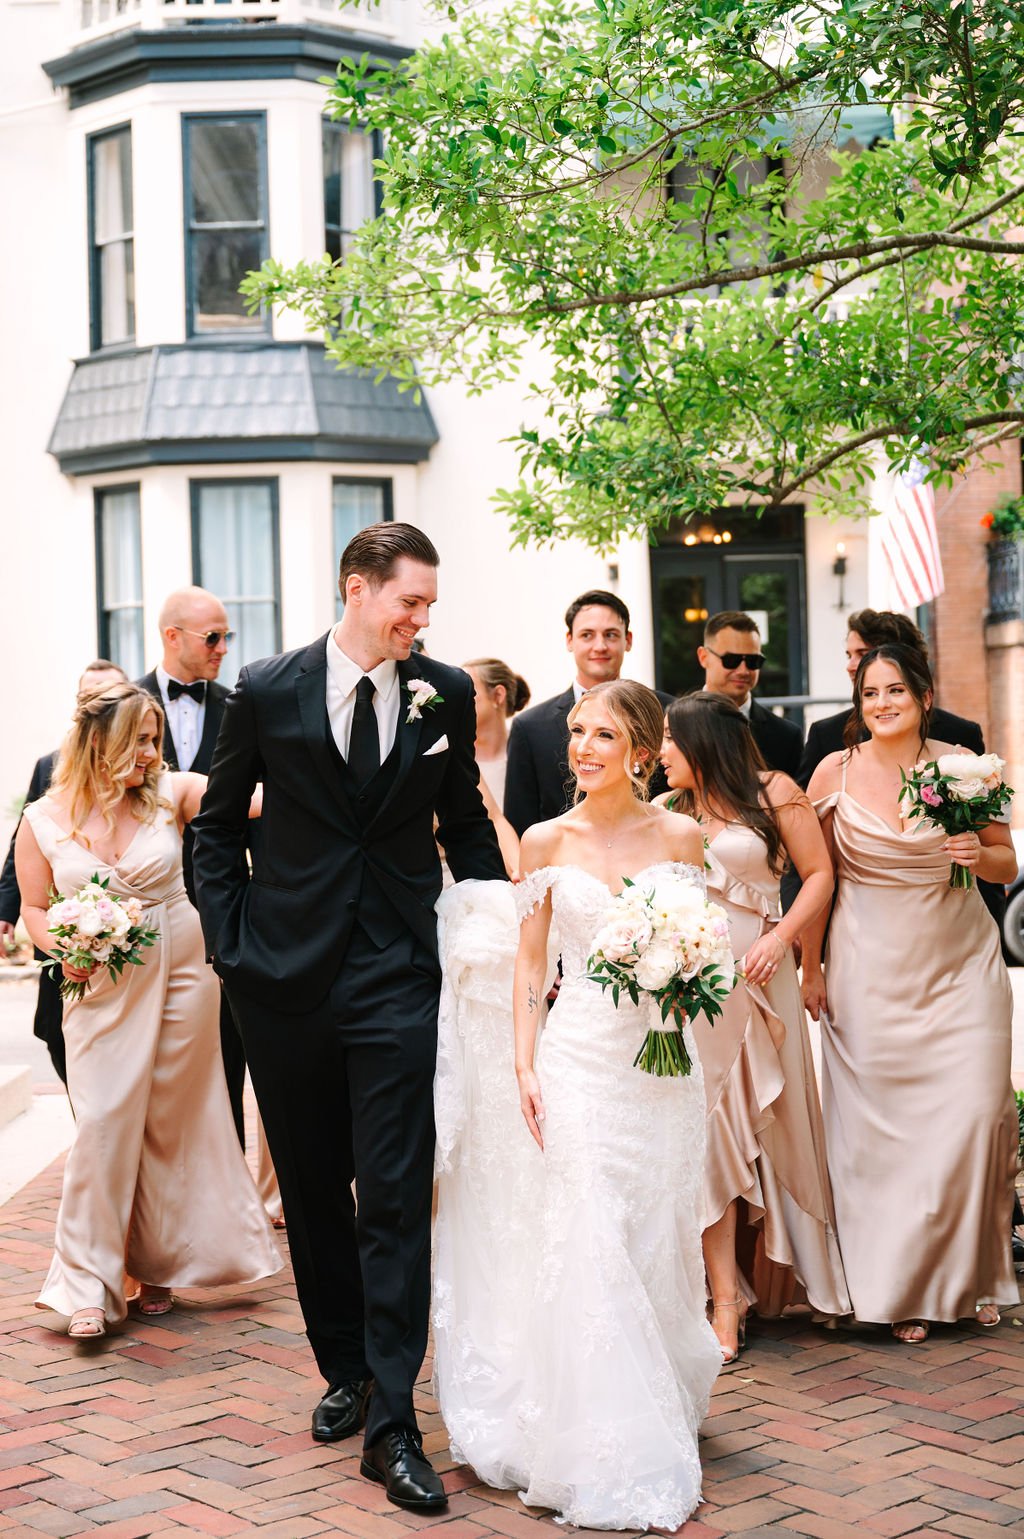 hayley-and-chris-romantic-rooftop-wedding-at-the-perry-lane-in-savannah-ga-featuring-organic-lush-wedding-florals-designed-by-ivory-and-beau-9.jpg